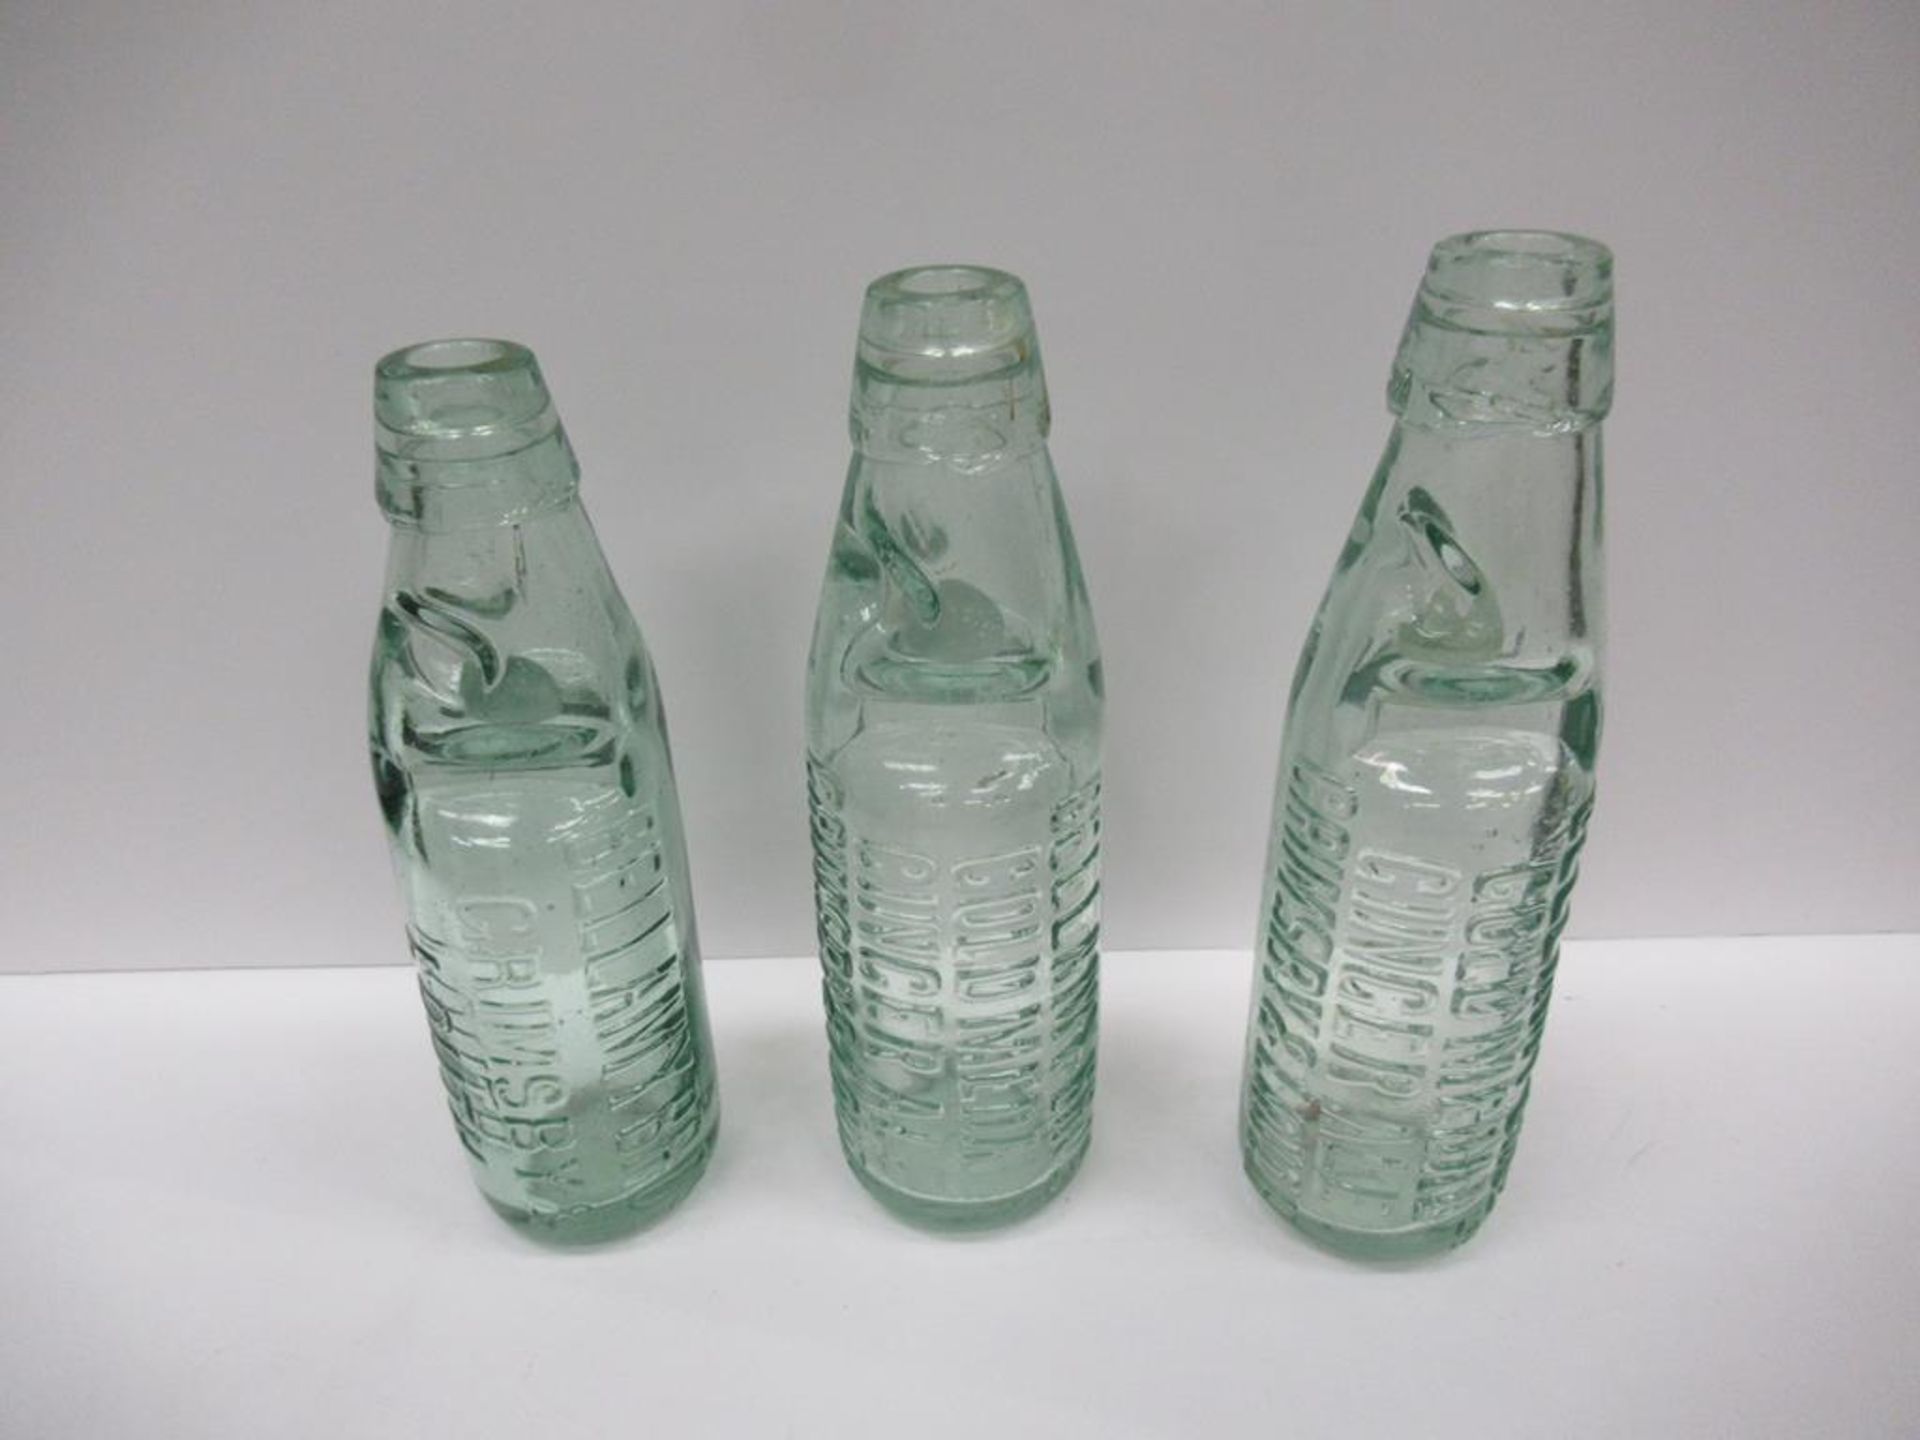 7x Grimsby (3x Grimsby & Louth) Bellamy Bro's Codd bottles - Image 14 of 23